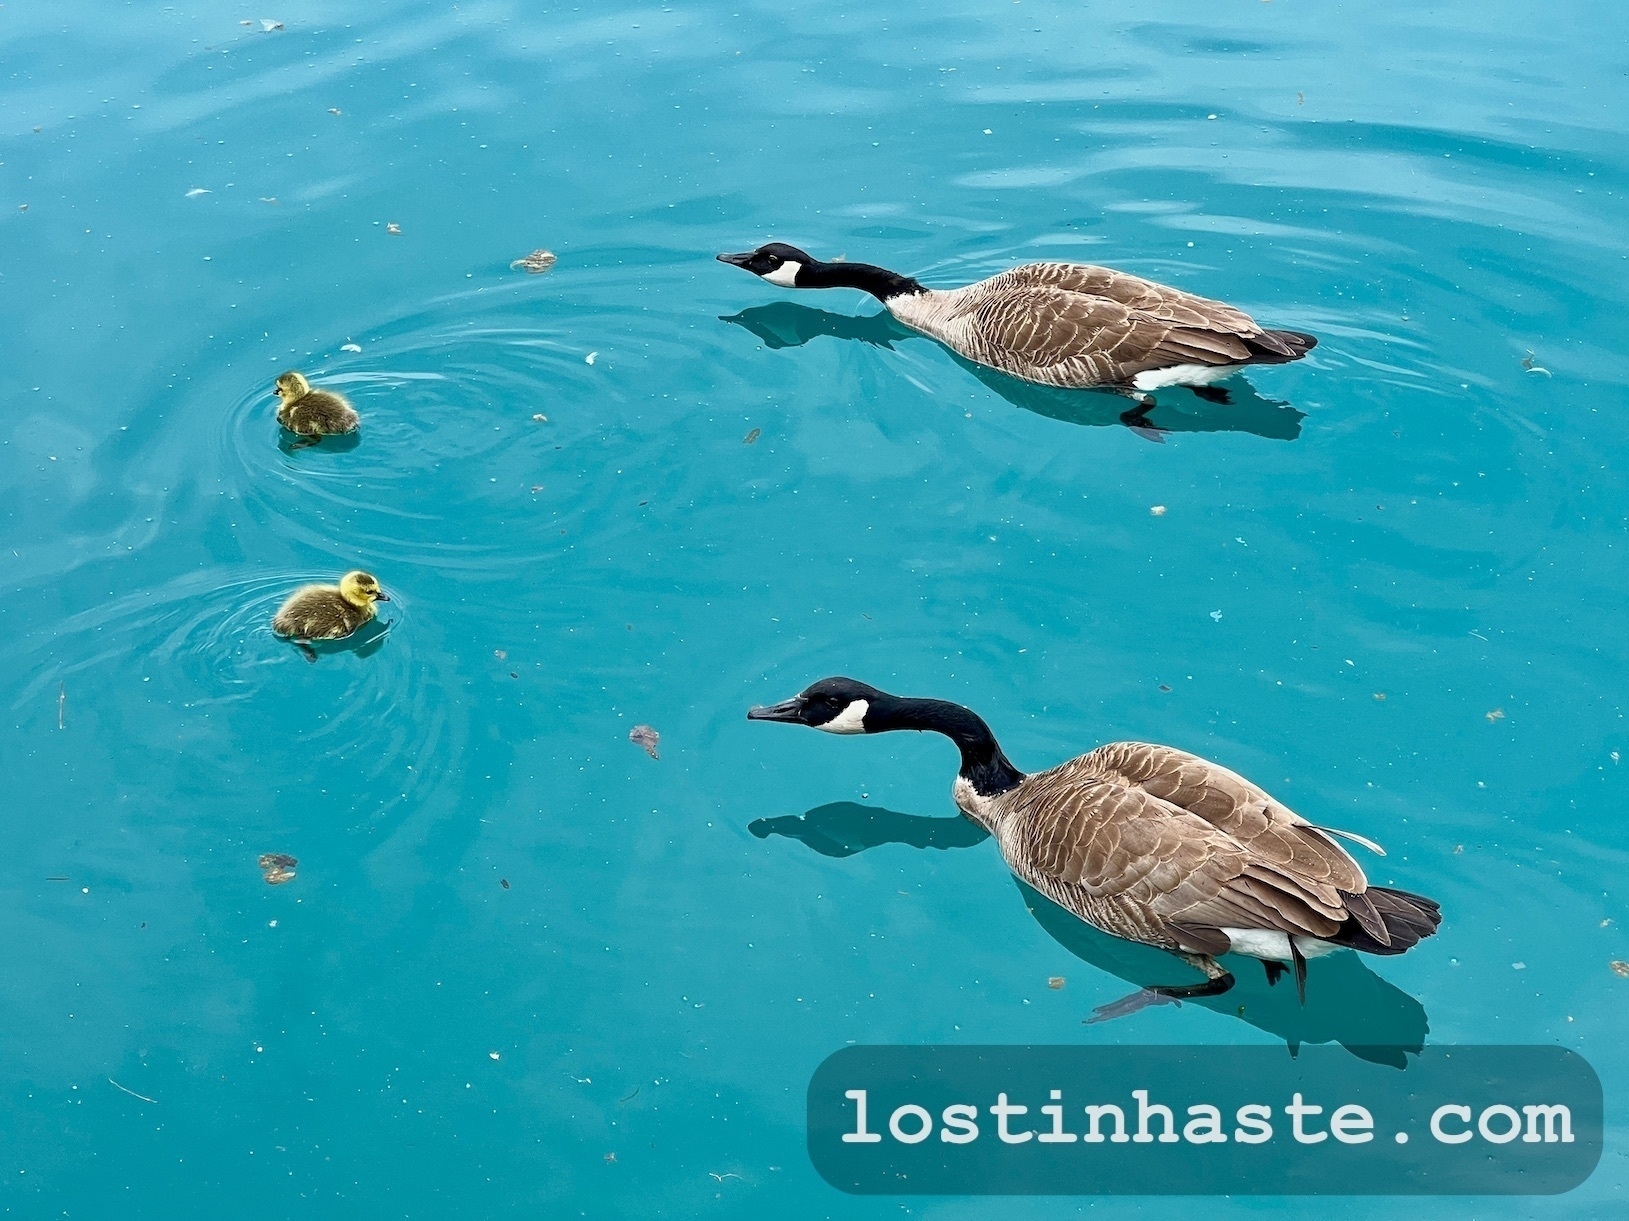 Two geese and their goslings swim in blue water. Text: lostinhaste.com